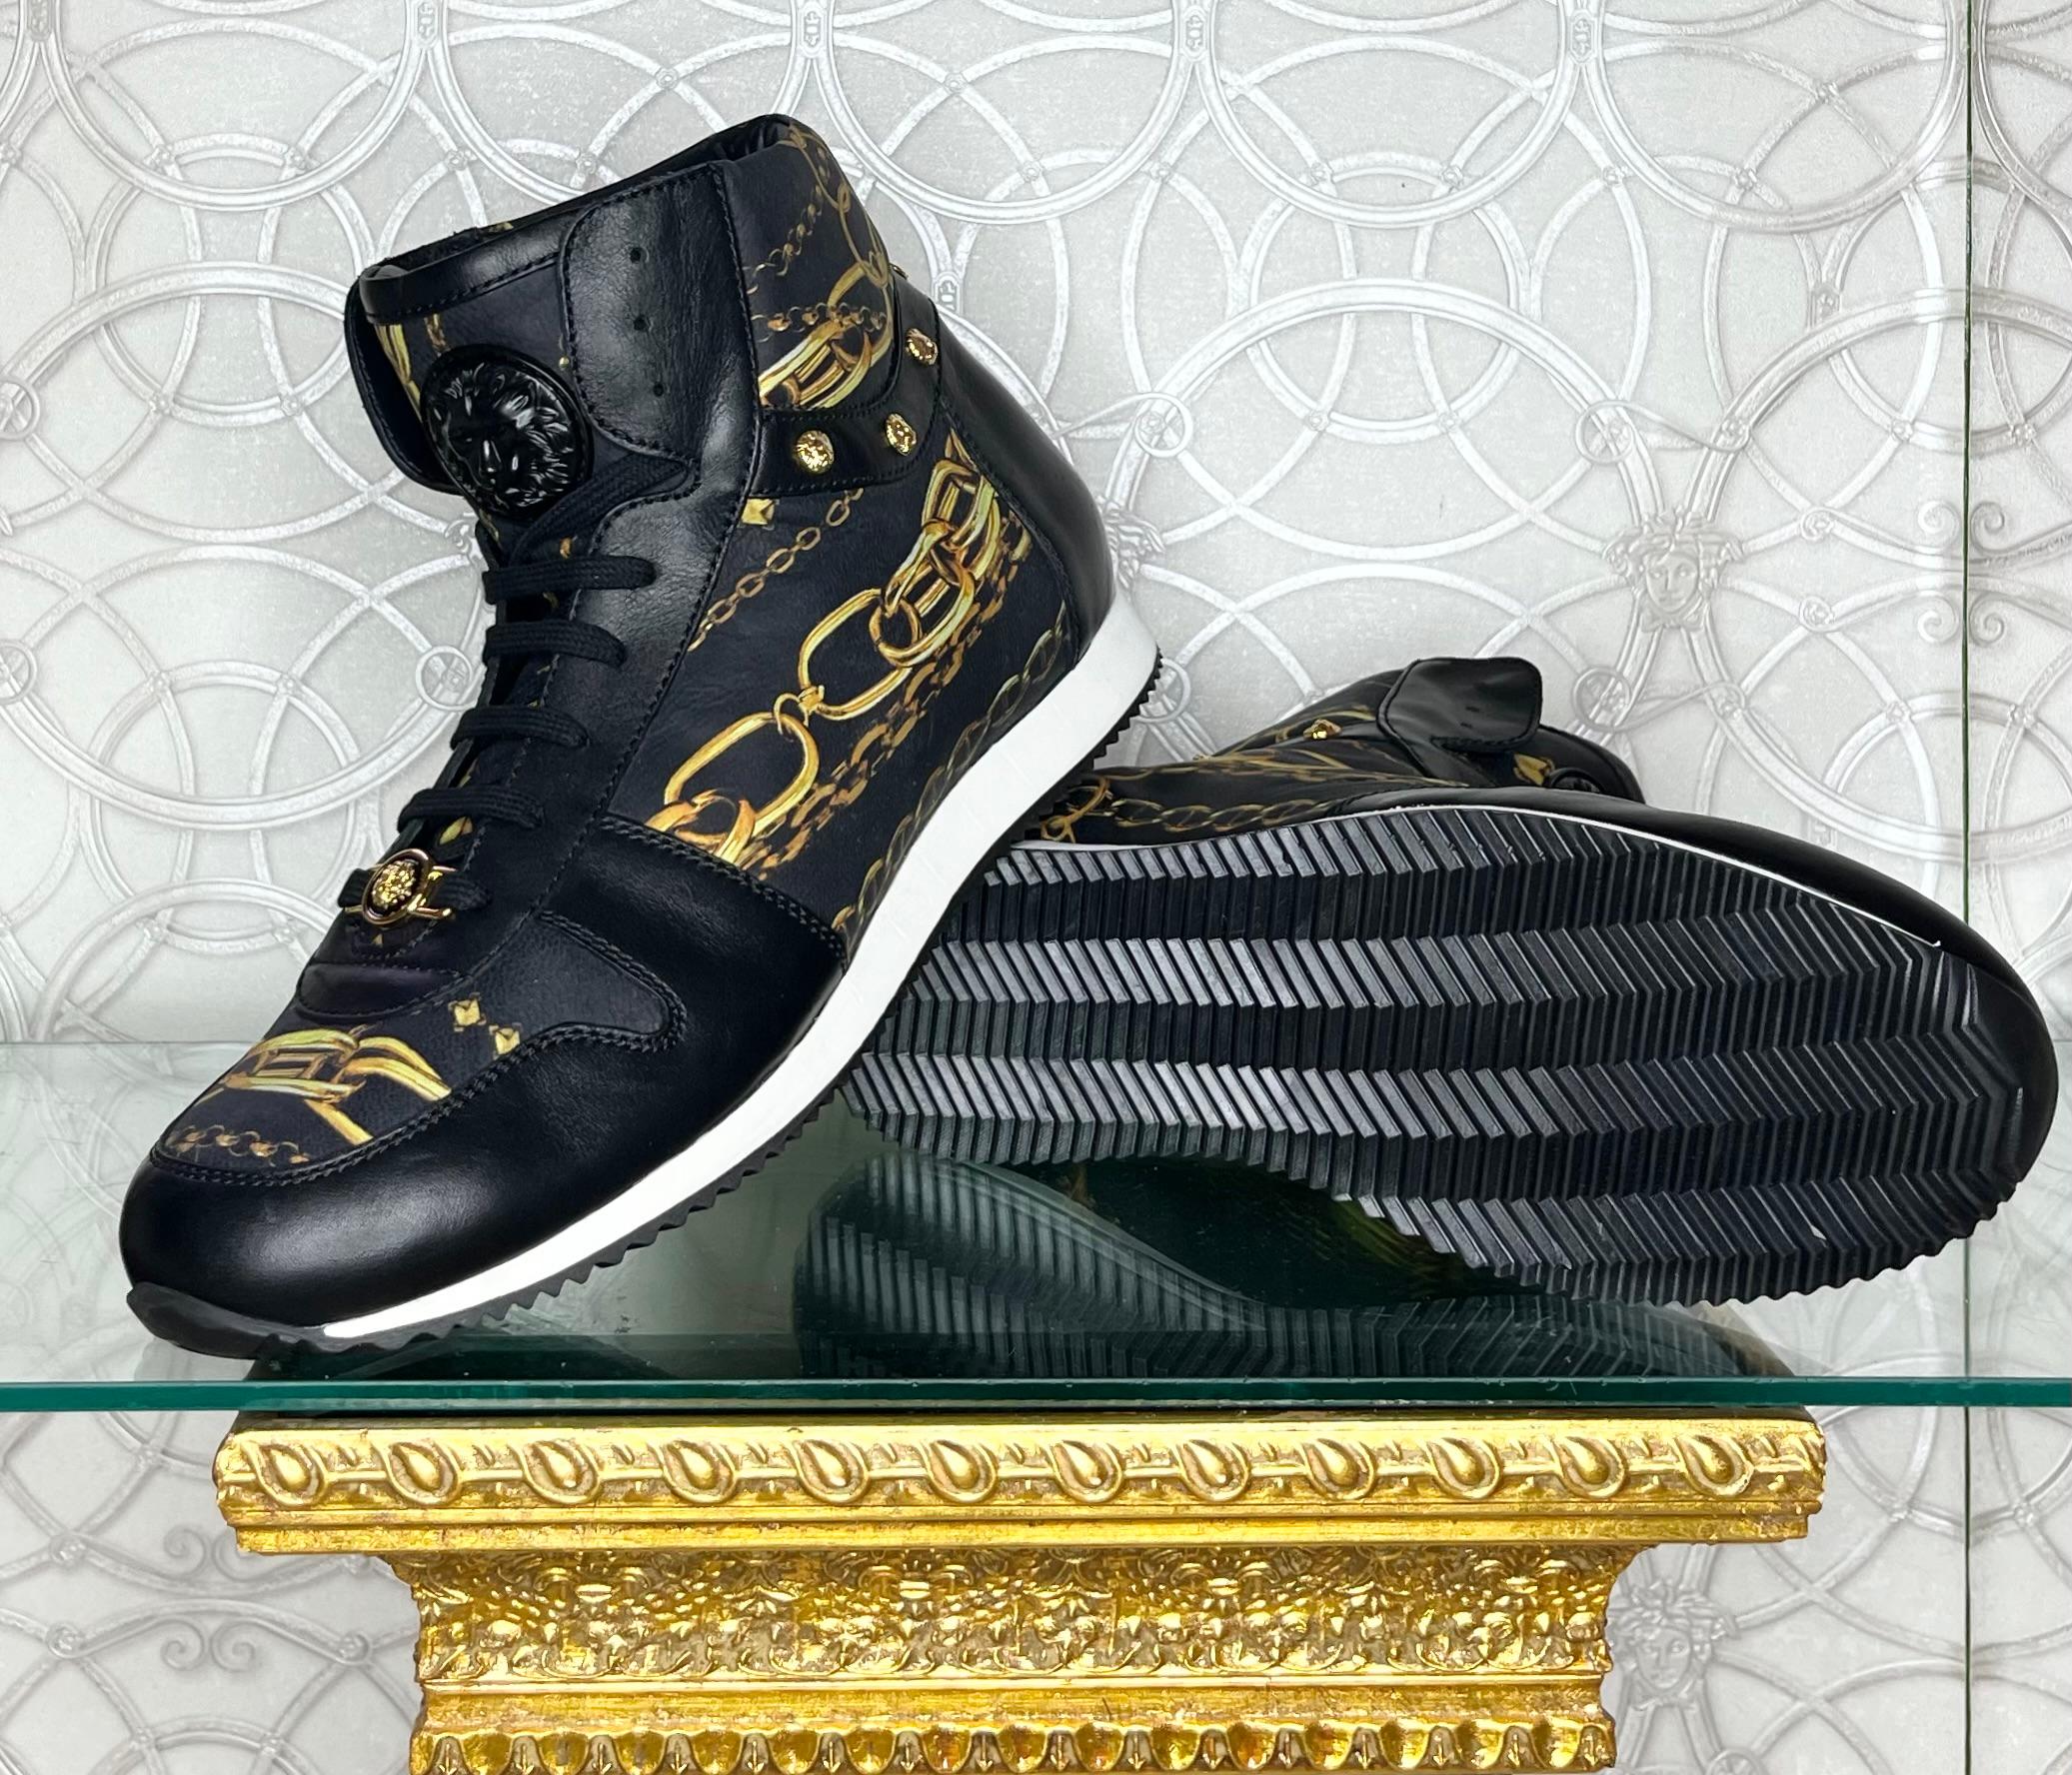 Black VERSACE HIGH-TOP SNEAKERS w/3D MEDUSA BUCKLE and GOLD-TONE ELEMENTS 44.5 - 11.5 For Sale